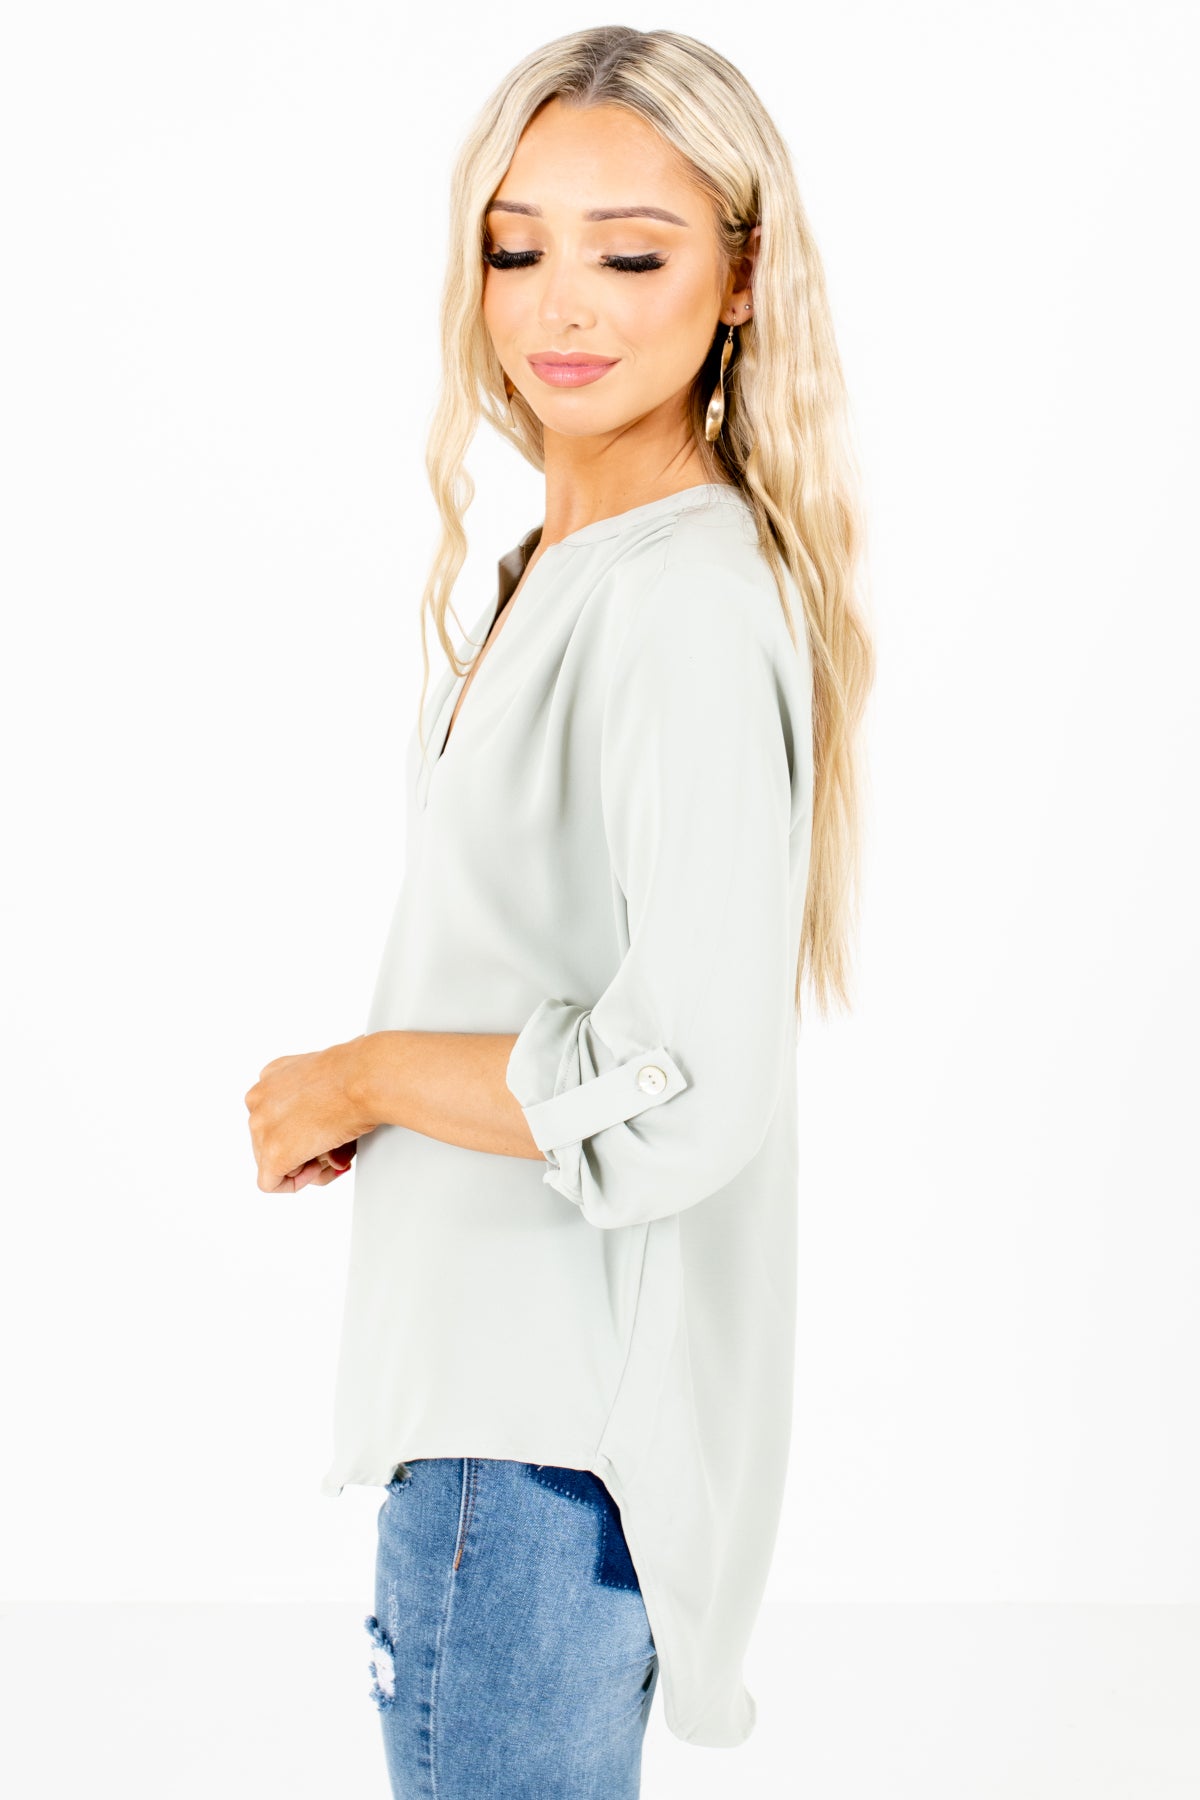 Sage Green High-Low Hem Boutique Blouses for Women